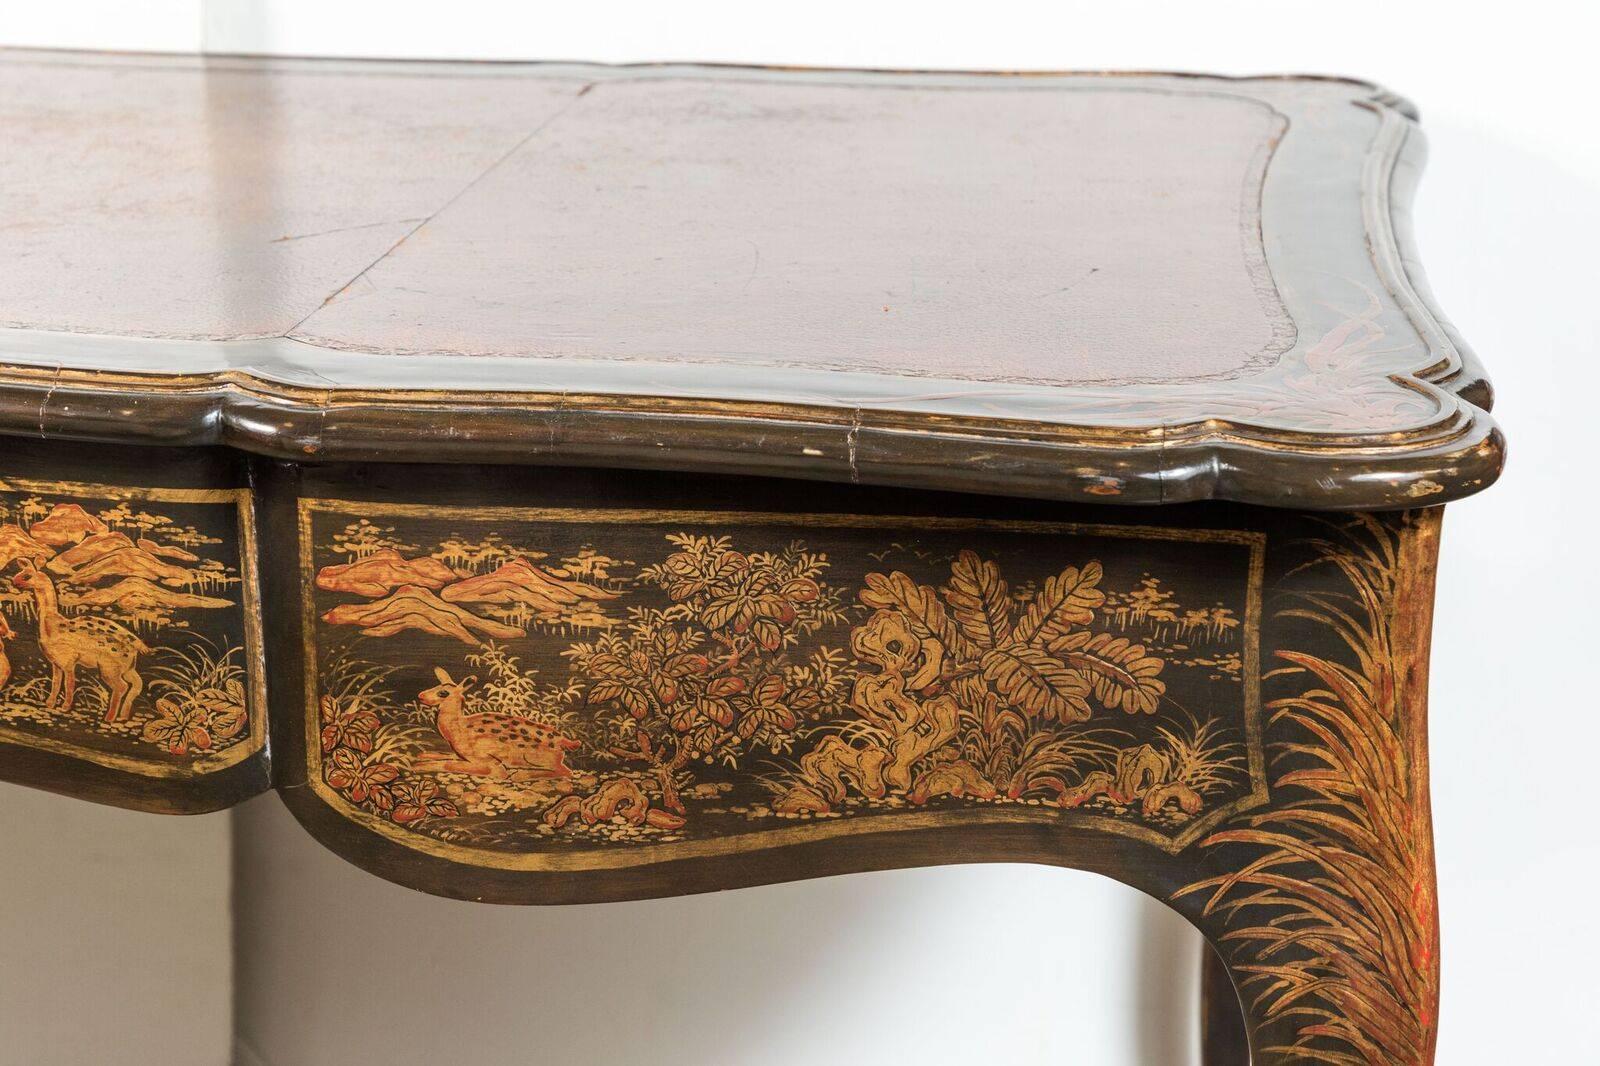 19th Century, Hand-Painted, Chinoiserie Desk 1